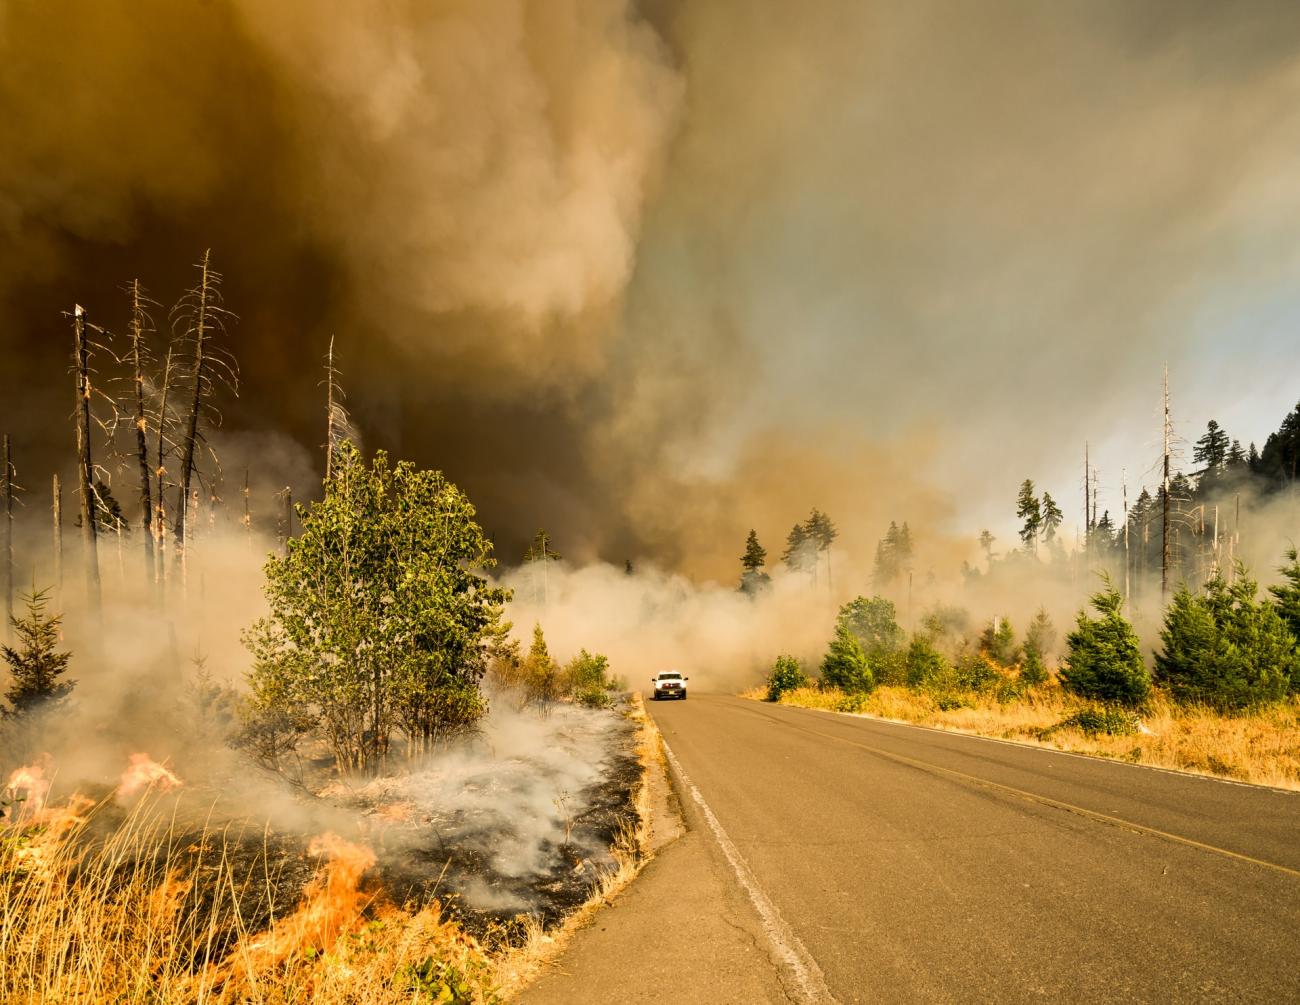 Vehicle drives along highway surrounded by smoke from forest fire